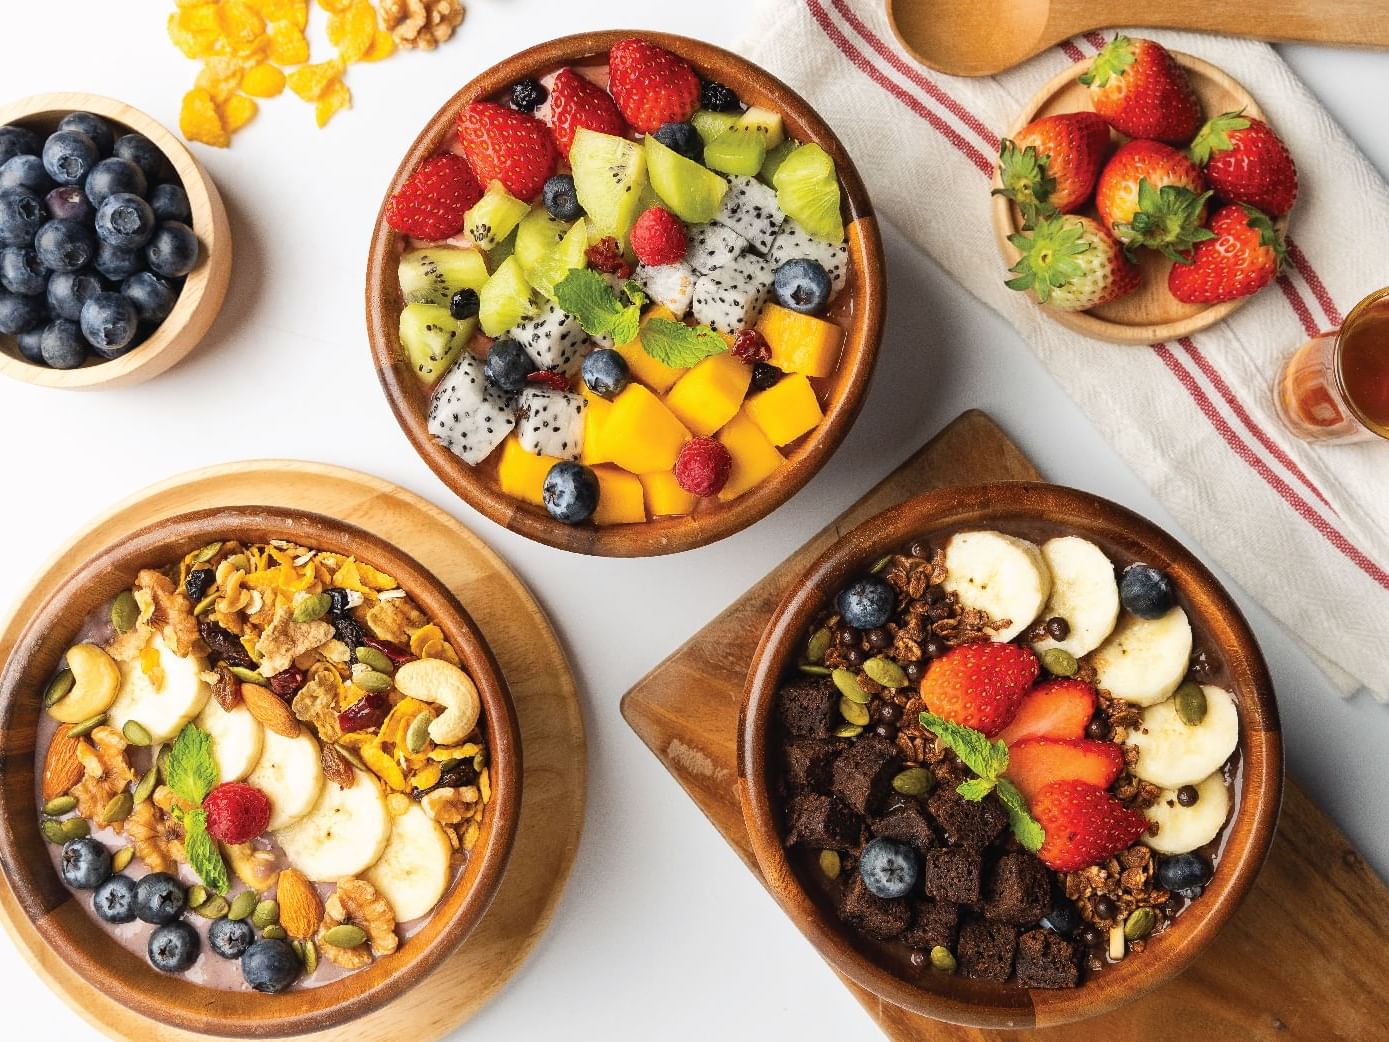  Assorted bowls of fruit, nuts, and cereal.